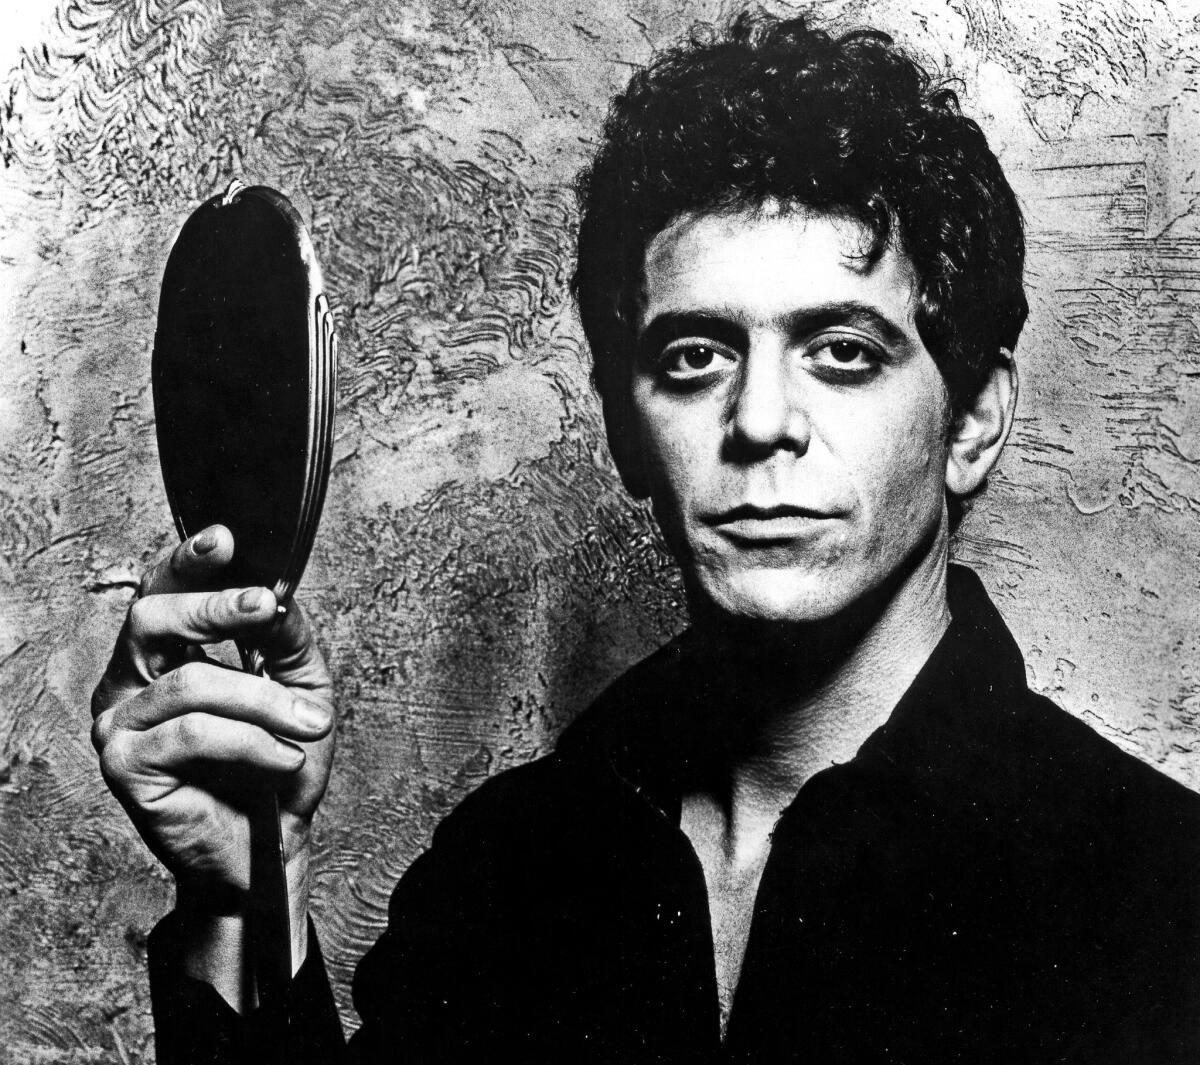 Lou Reed, in a photo circa 1970, is among 15 acts nominated for induction into the Rock and Roll Hall of Fame in 2015.